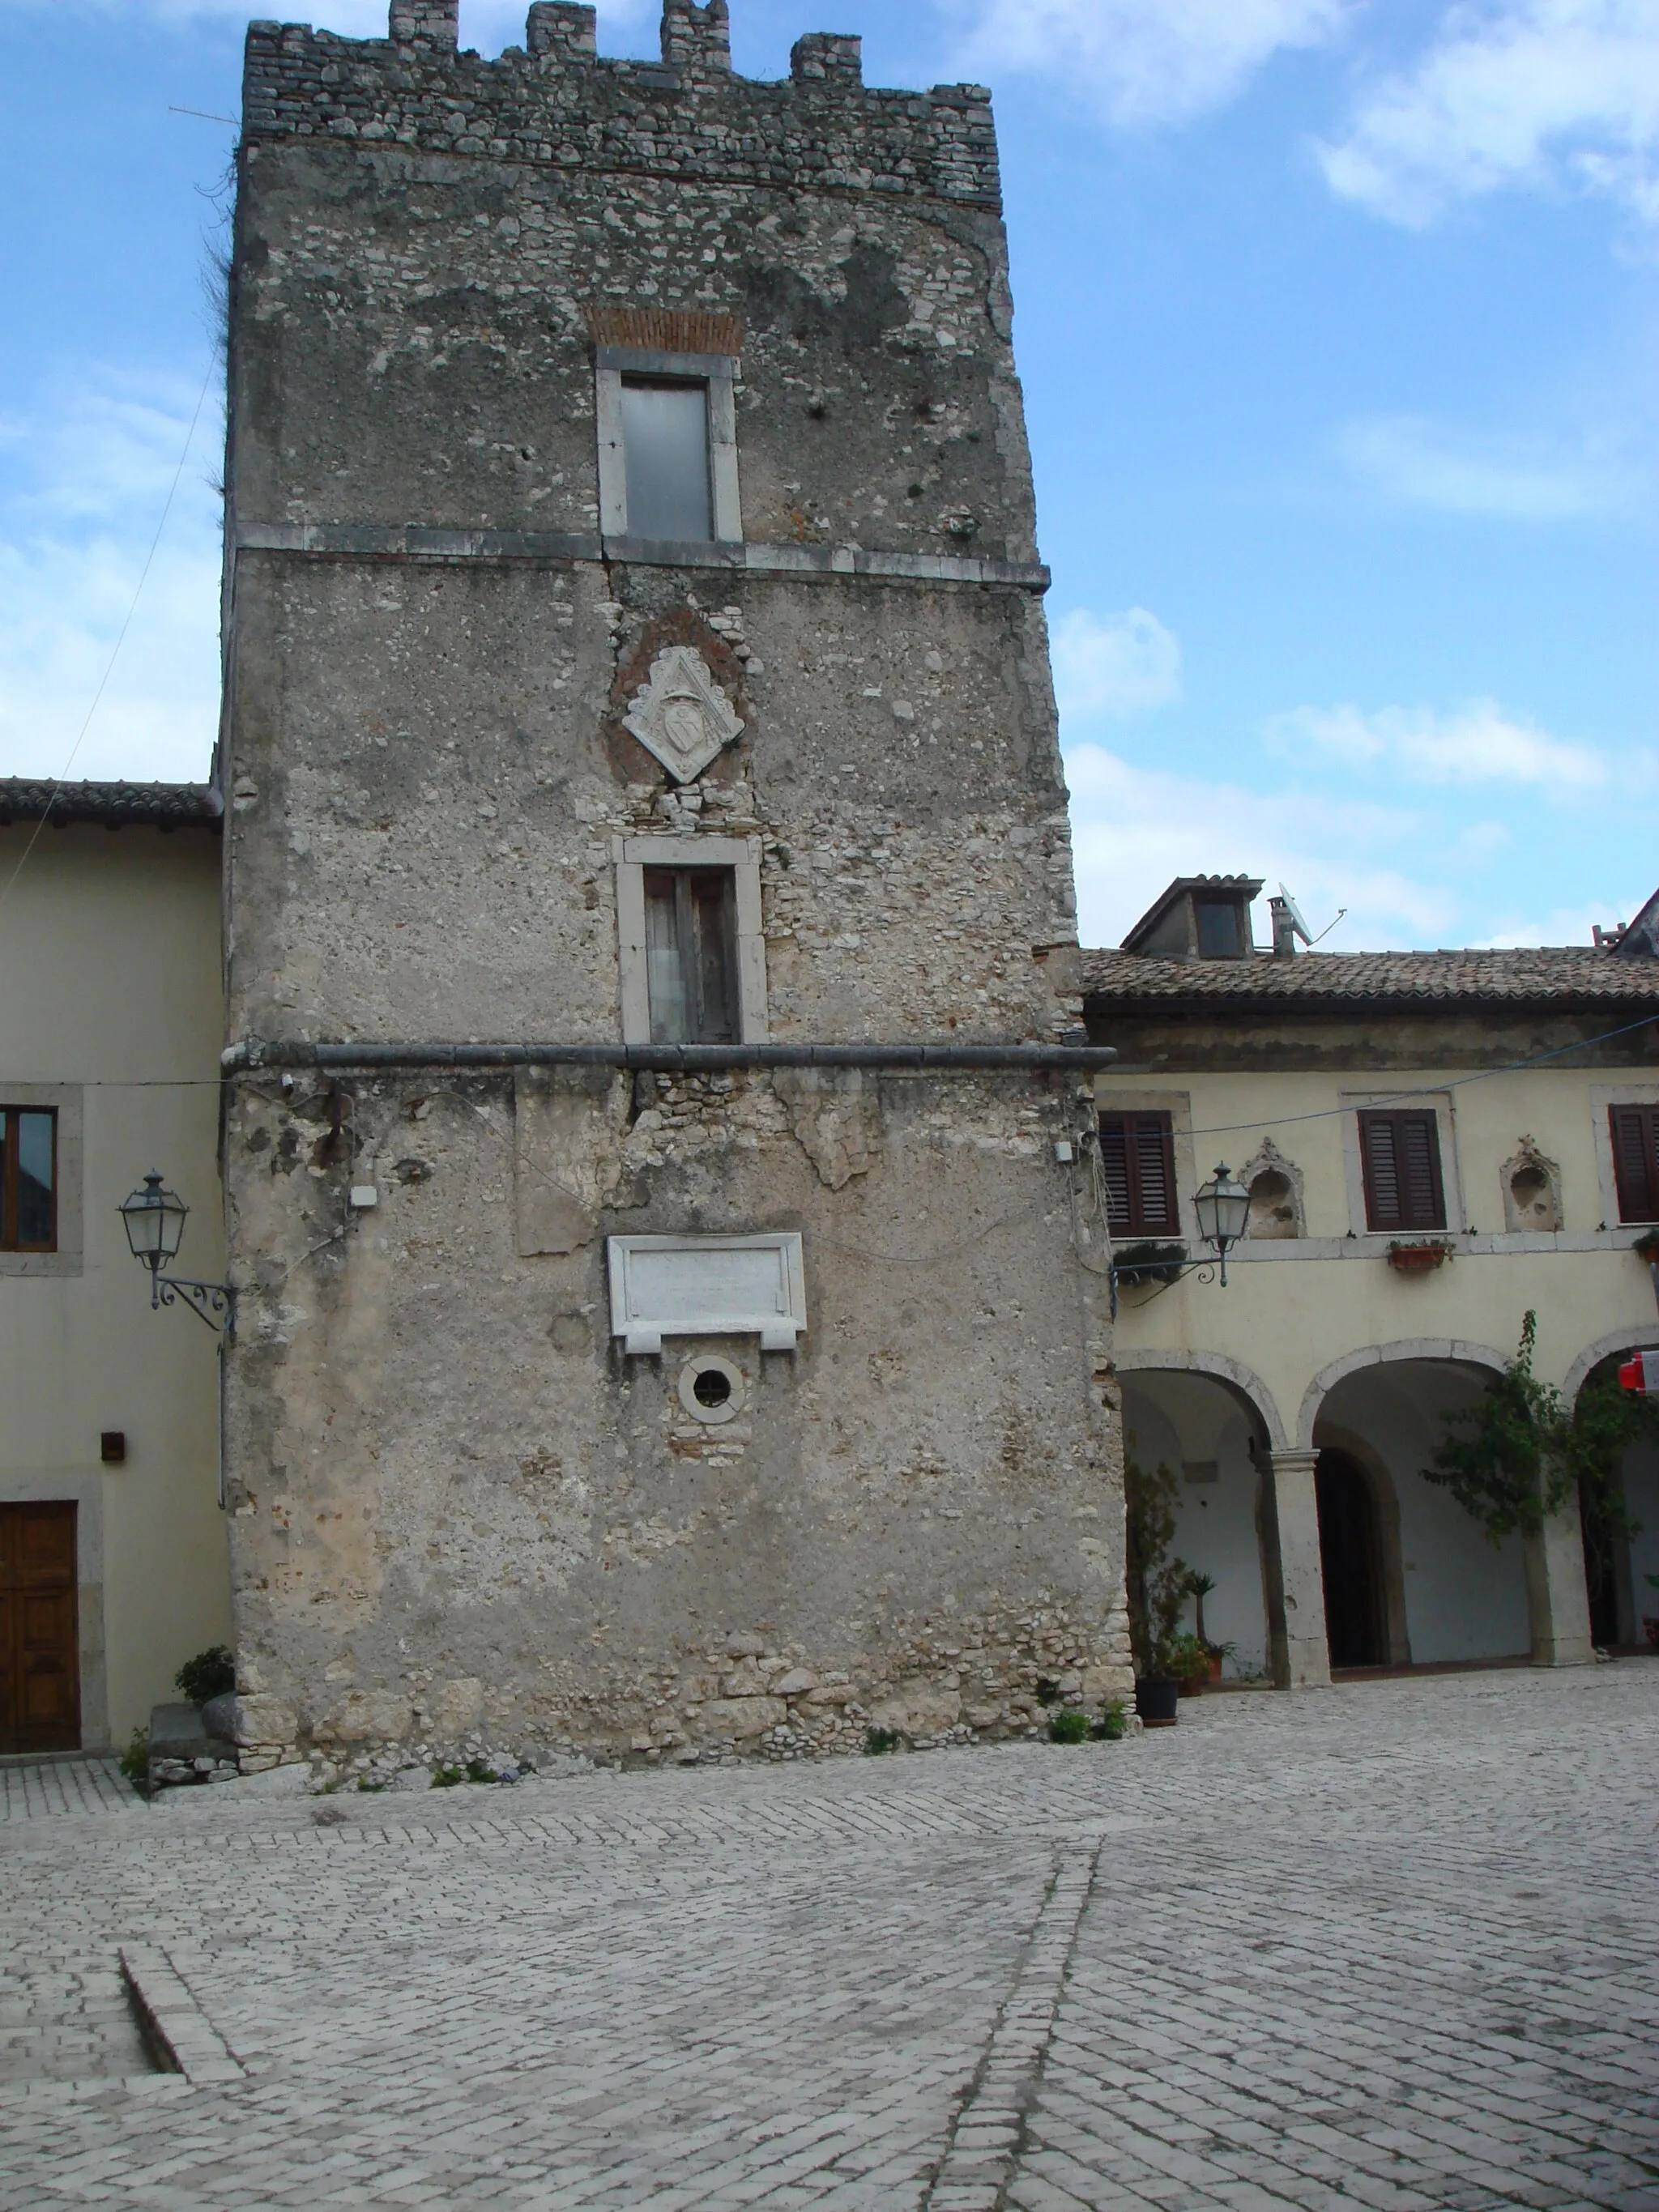 Photo showing: Picture of Castello Orsini, located in Licenza, province of Rome